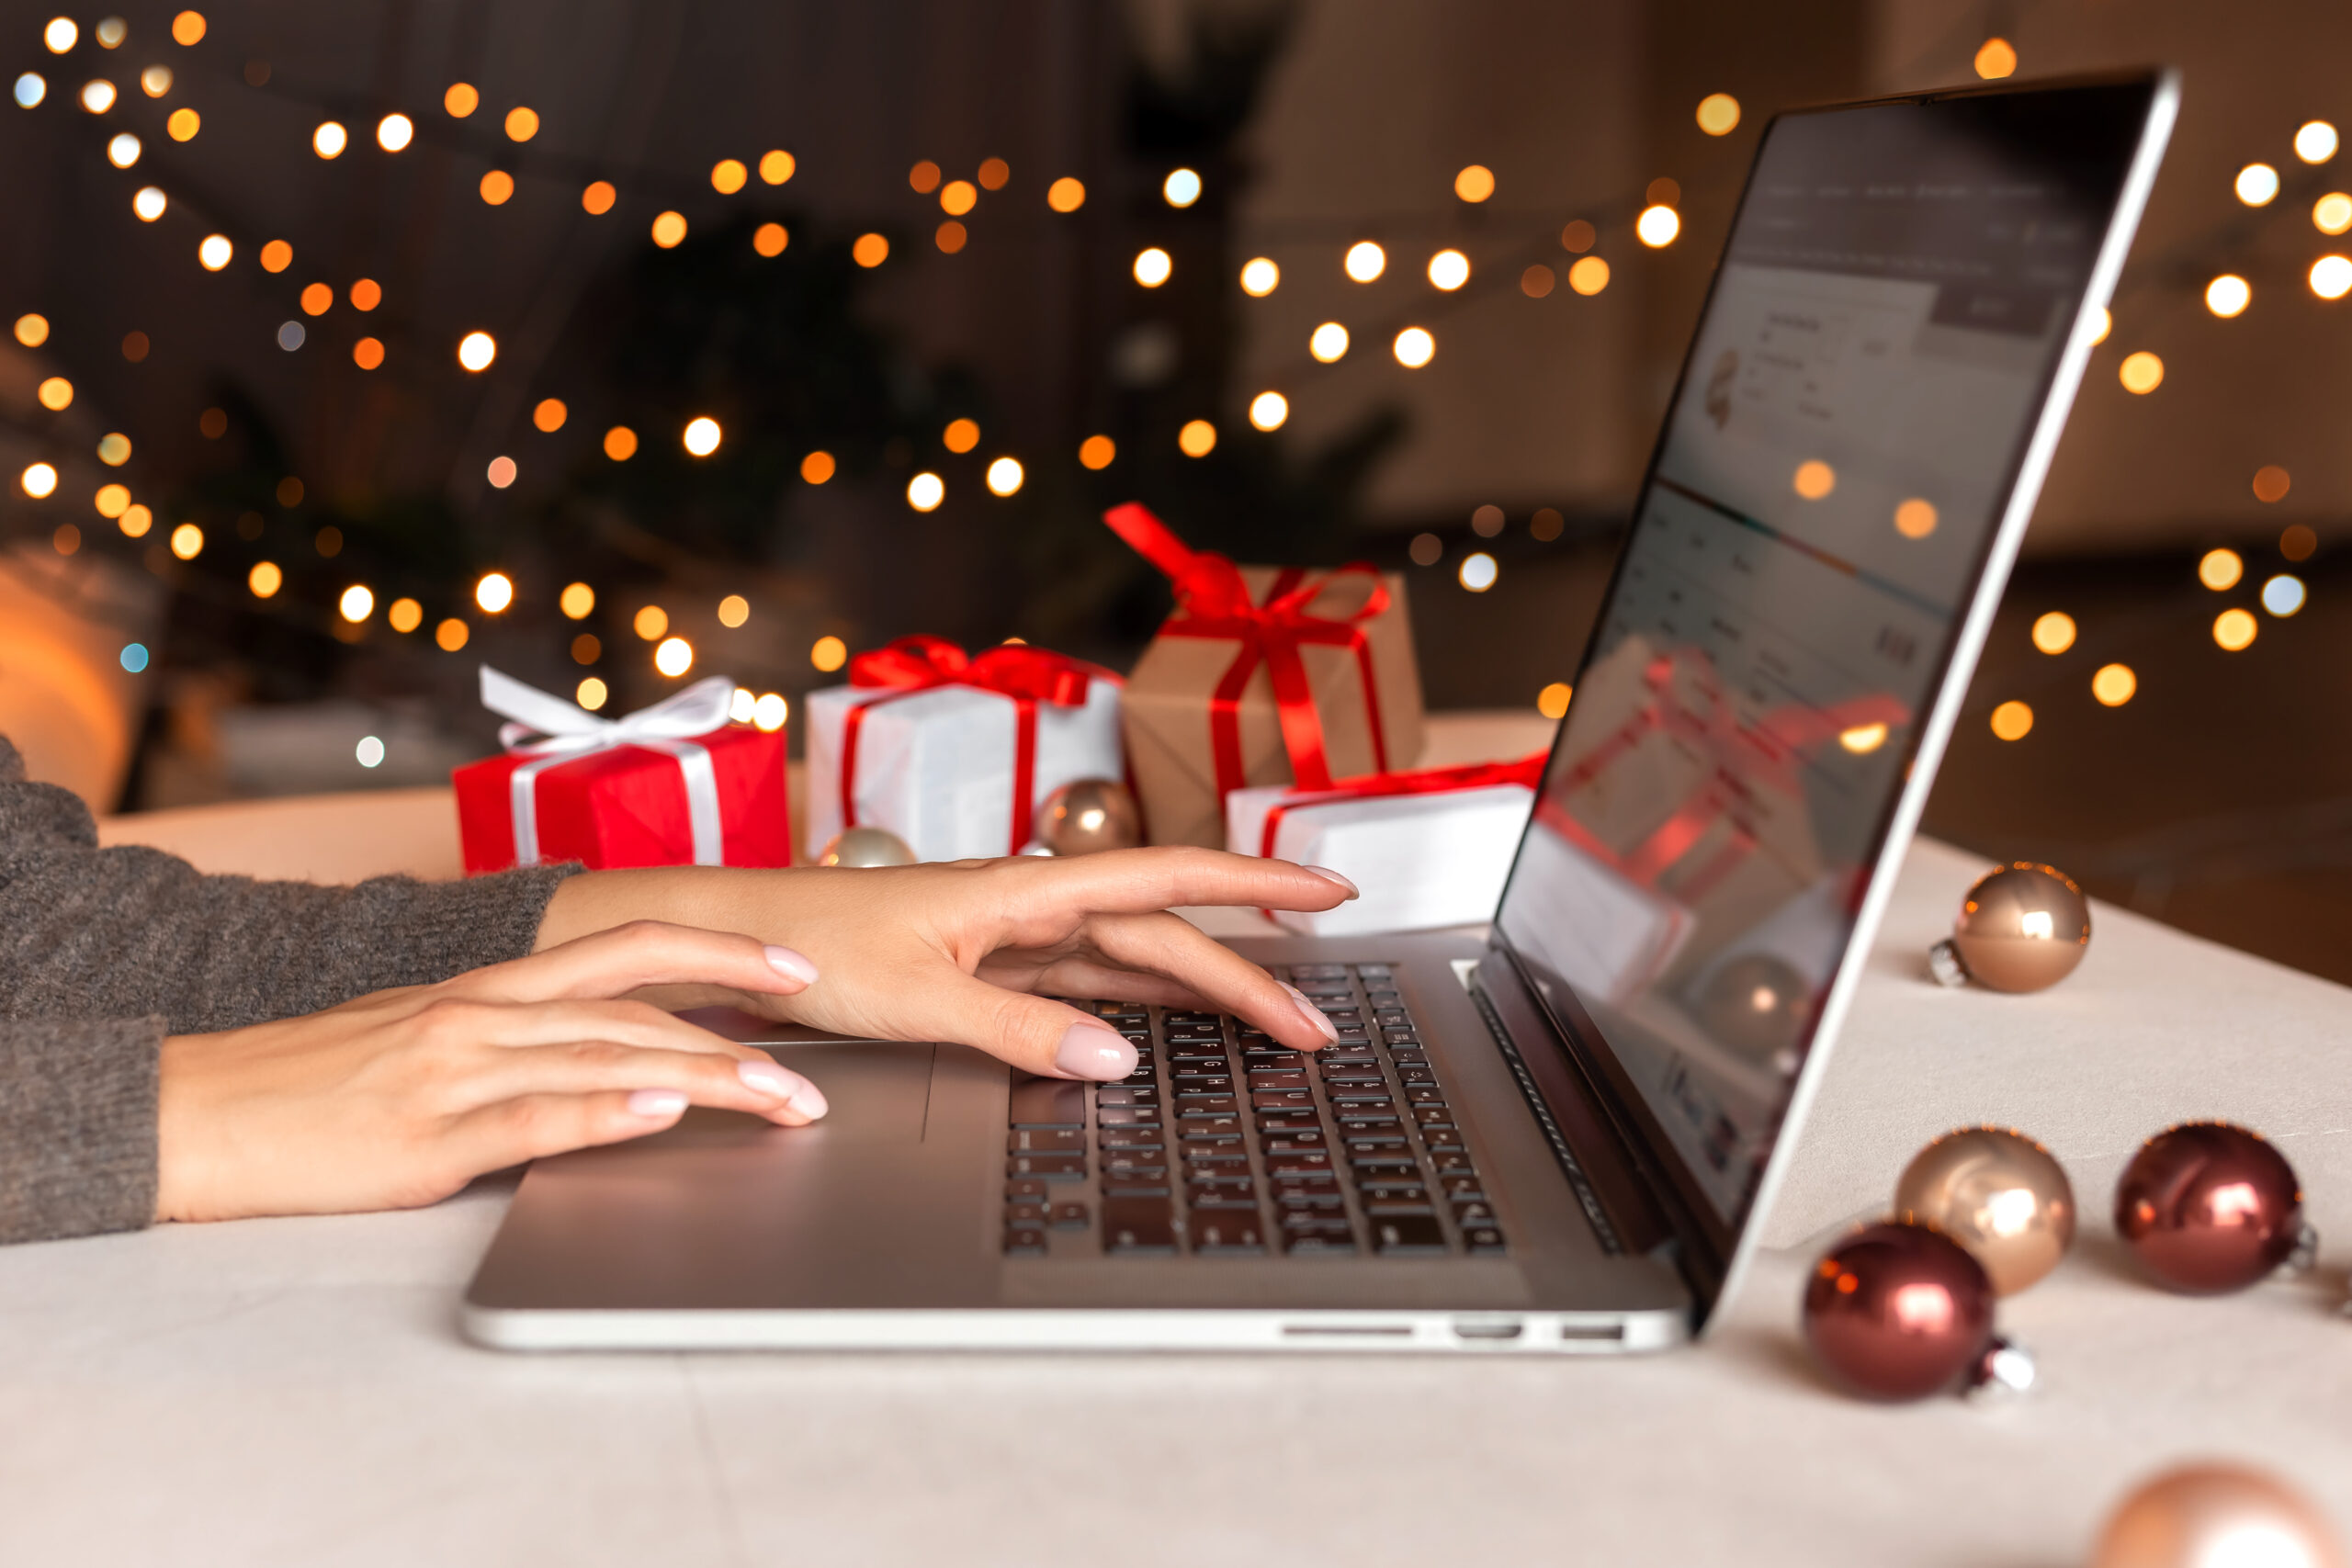 Female,Hands,On,The,Laptop,With,Gifts,And,Blurred,Bokeh